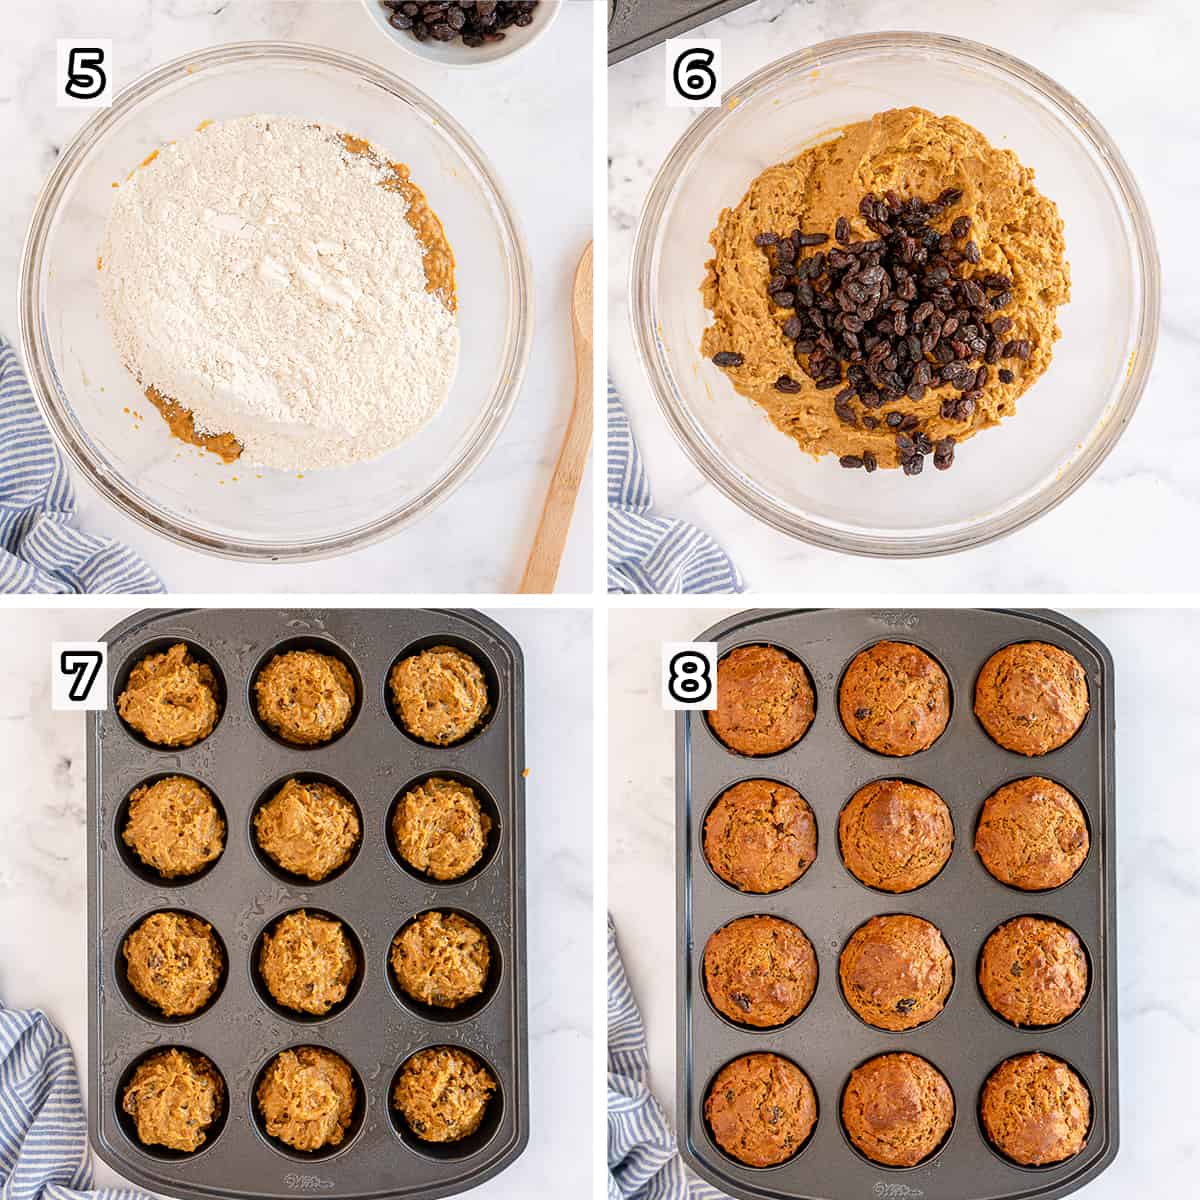 Dry ingredients and raisins are added to muffin batter and scooped into a muffin pan.